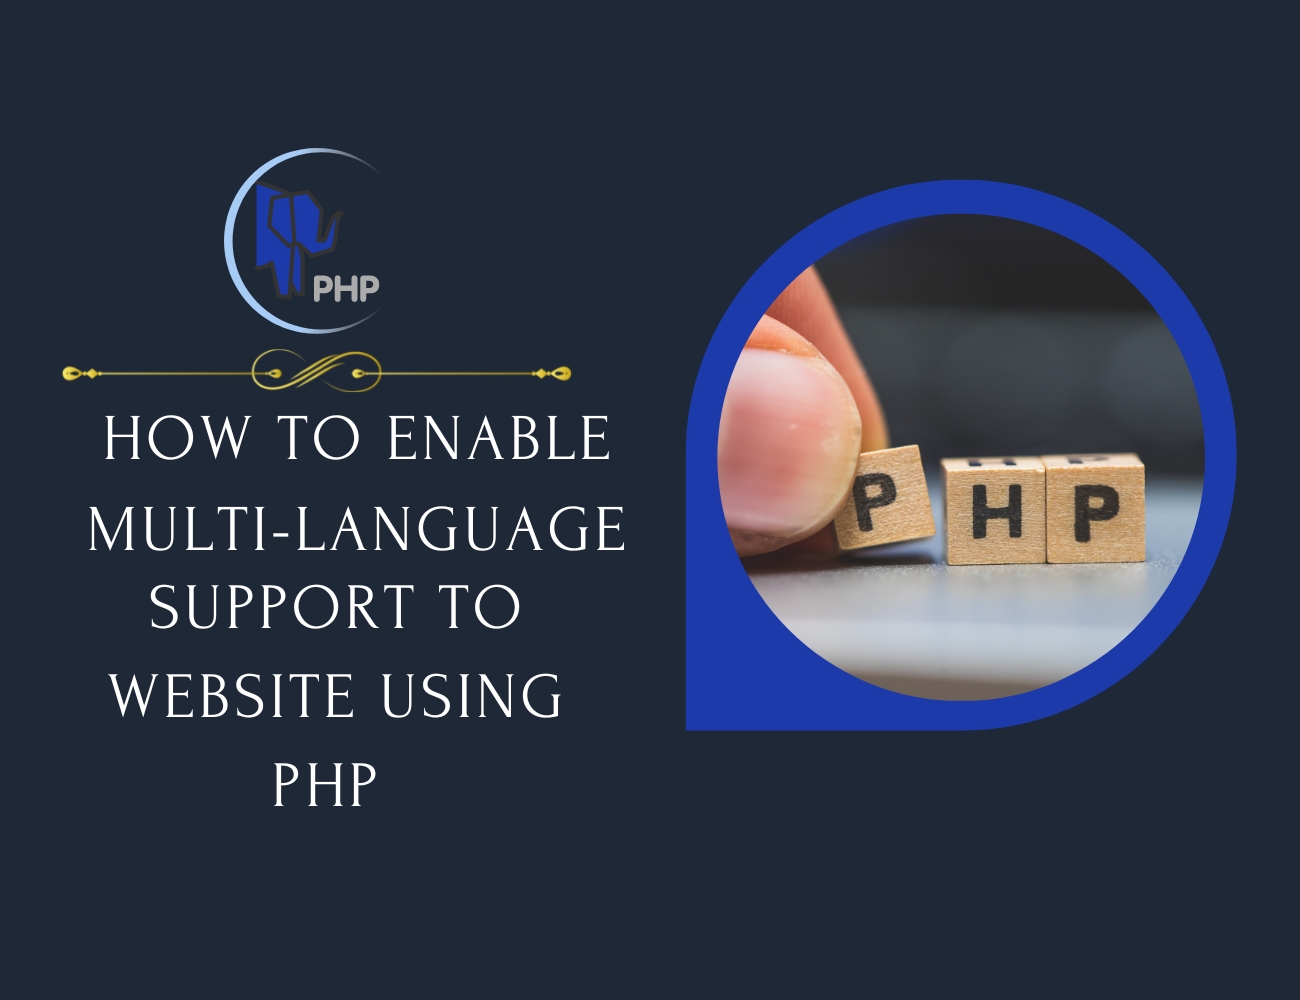 How to Enable Multi-language Support to Website using PHP